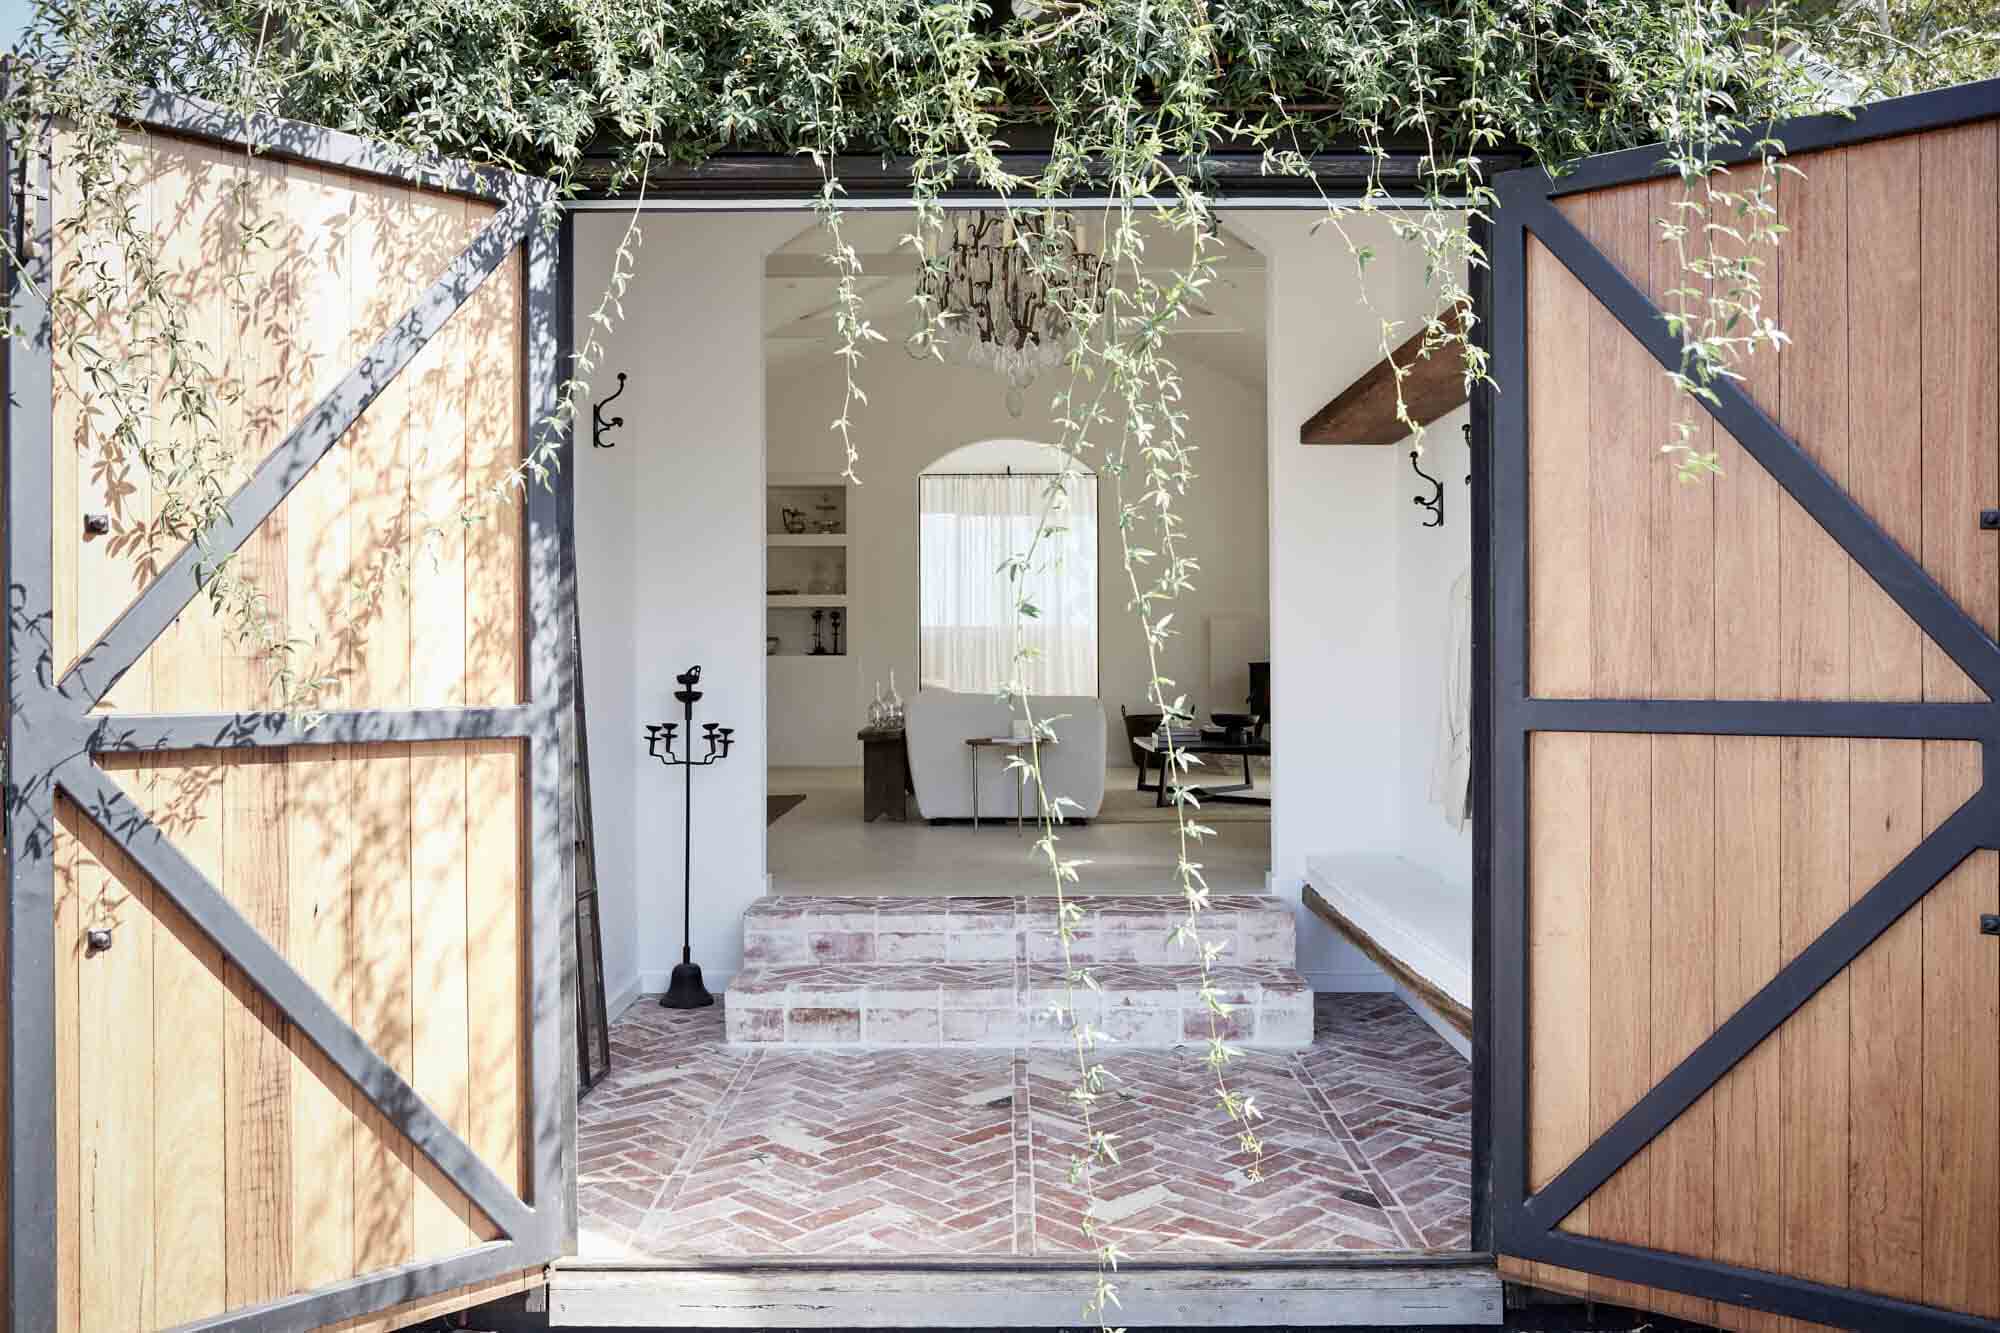 The front entrance to the Le Viti Barn accommodation in Newrybar with hanging vines, rustic barn doors, herringbone brick entry tiles and vintage chandelier